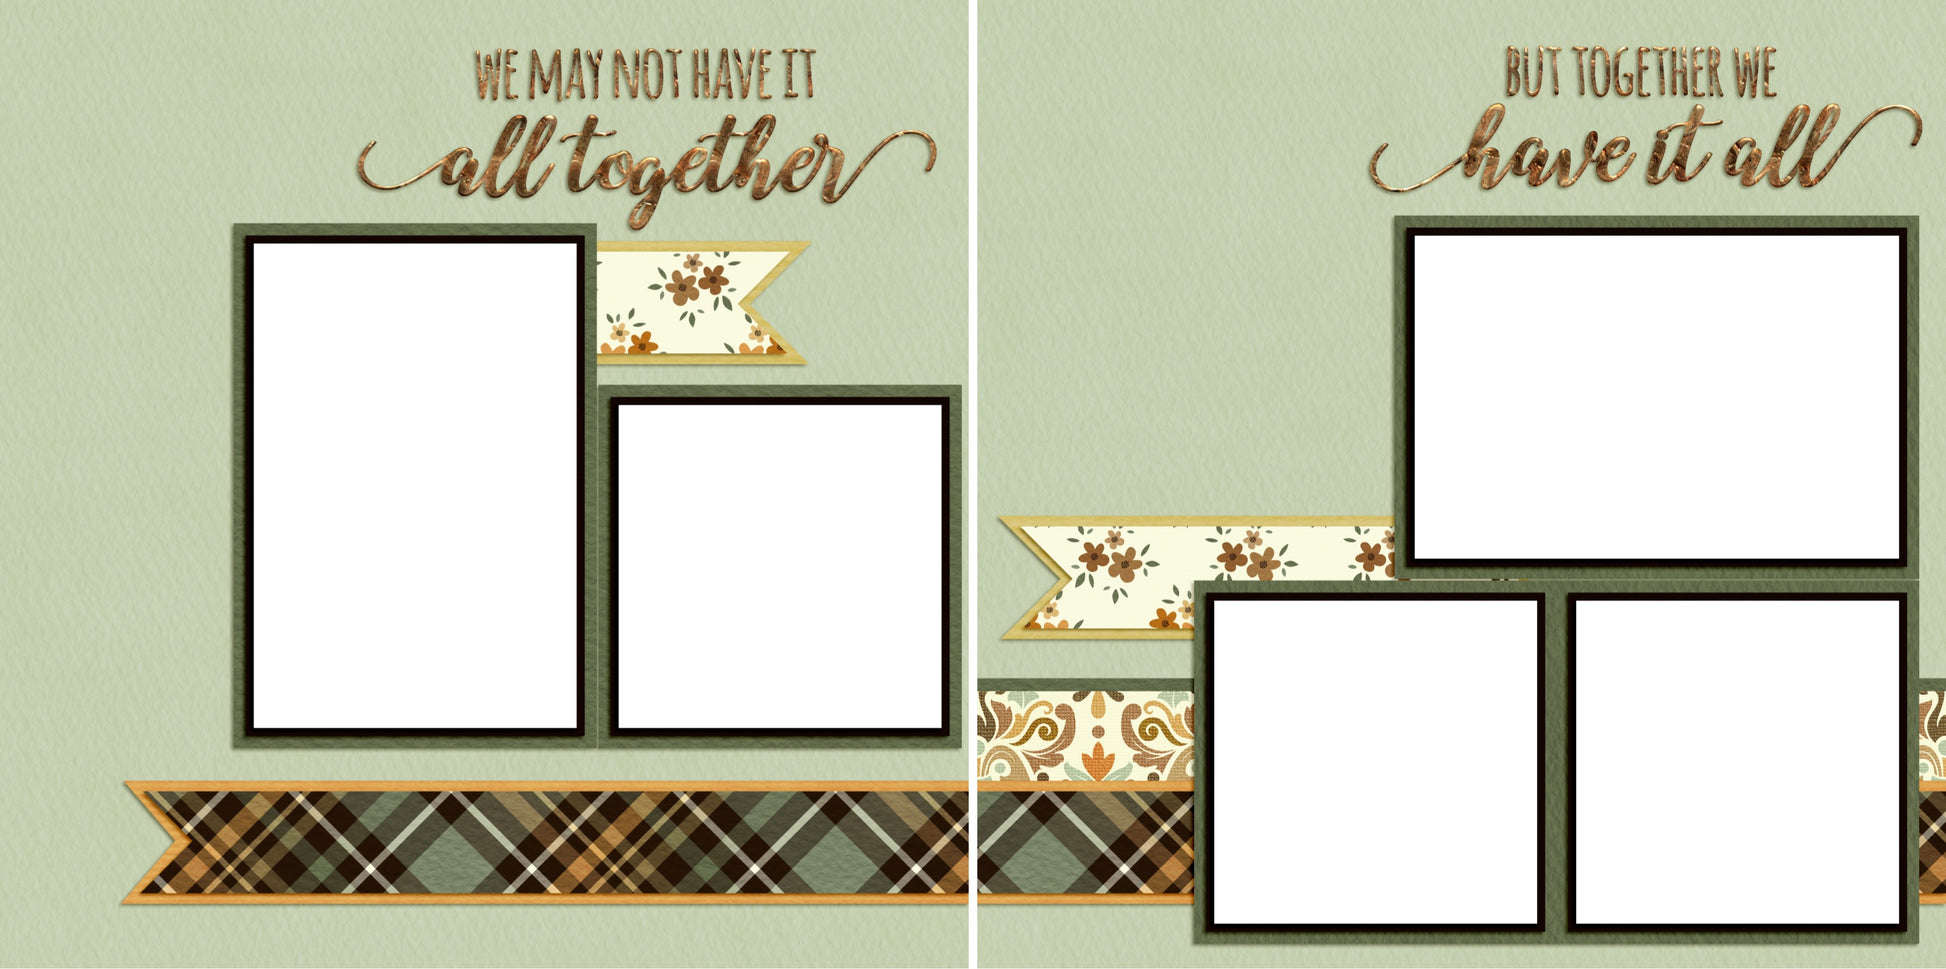 We Have It All - Digital Scrapbook Pages - INSTANT DOWNLOAD - 2019 - EZscrapbooks Scrapbook Layouts Family